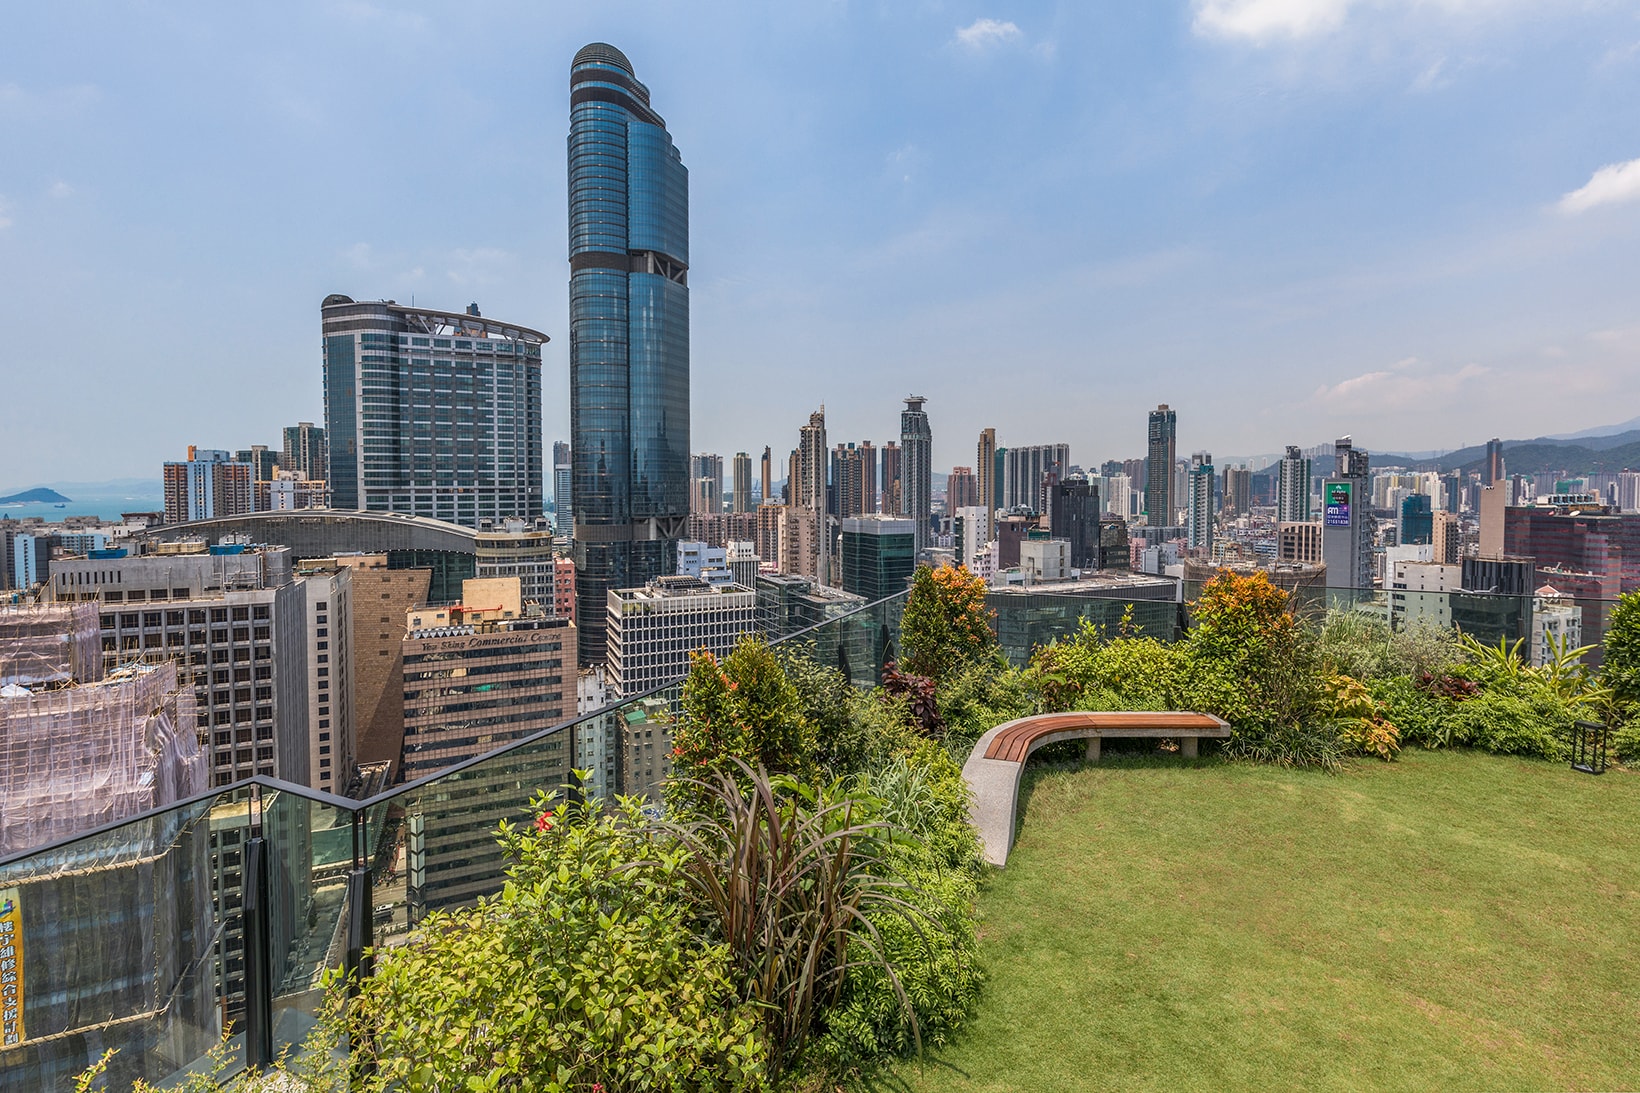 SKYPARK is Hong Kong's Latest Innovative Apartment Project Kowloon The New World Development Company